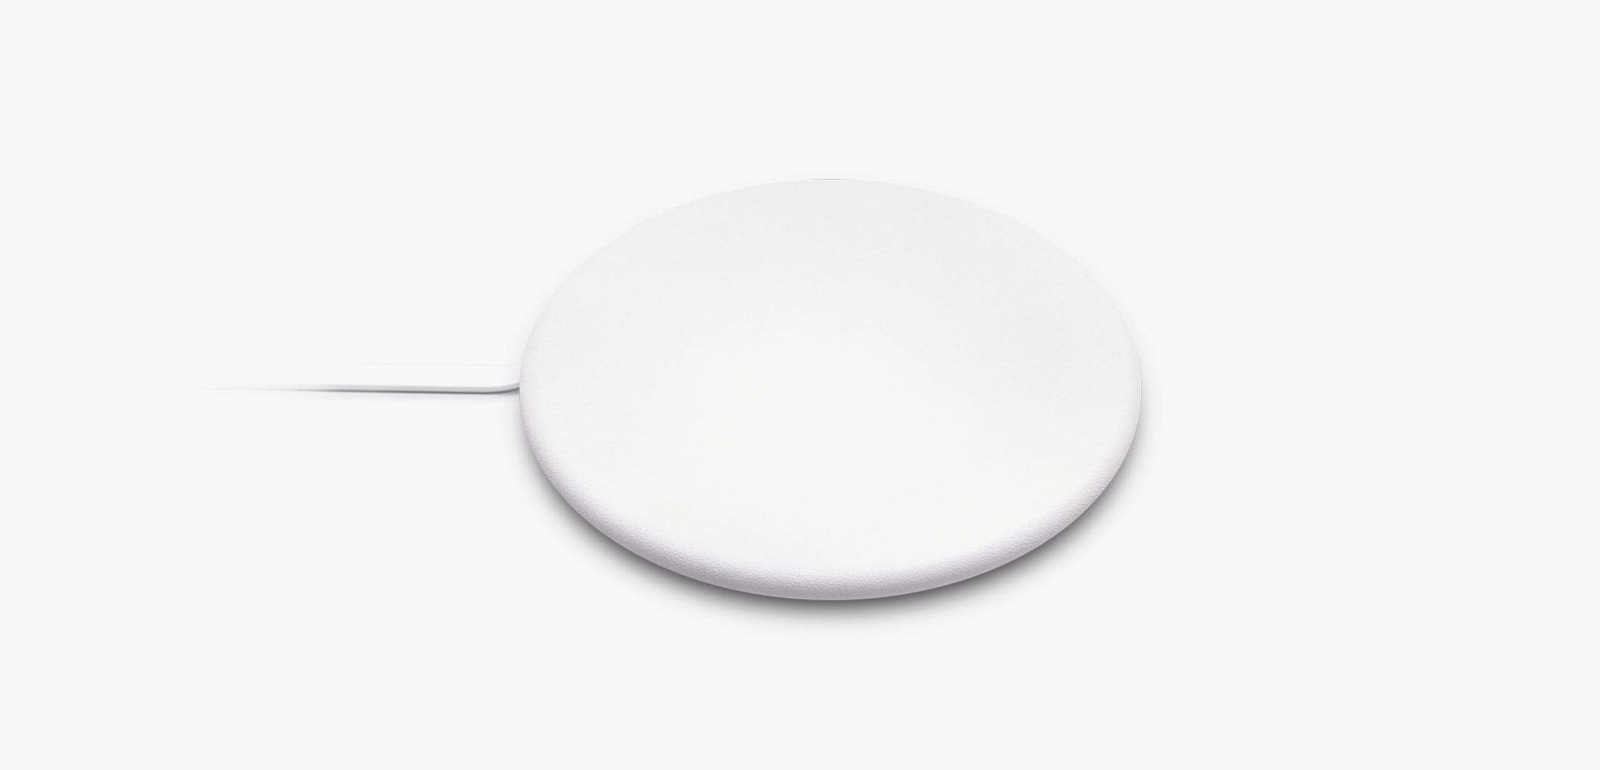 Peel Wireless Charger